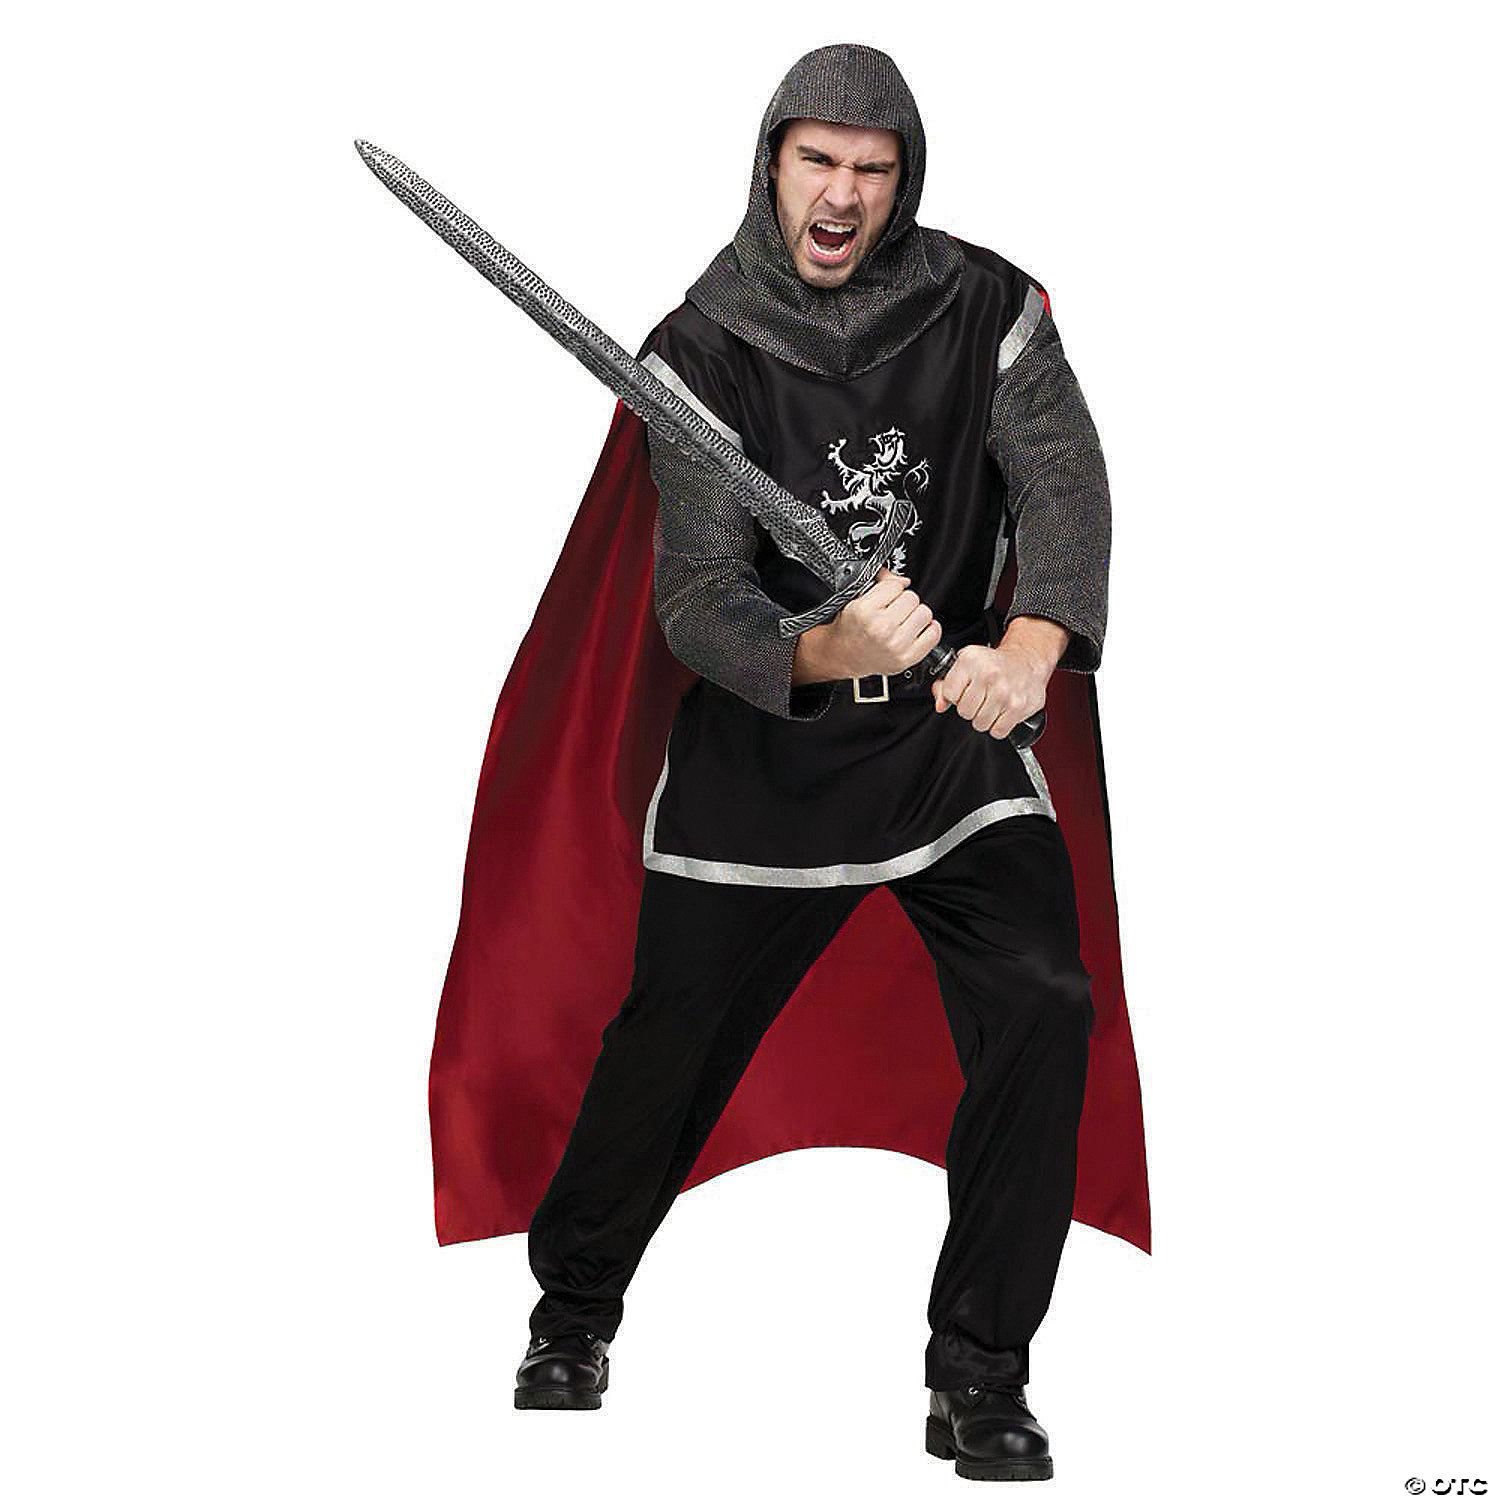 Men's Medieval Knight Costume - Discontinued